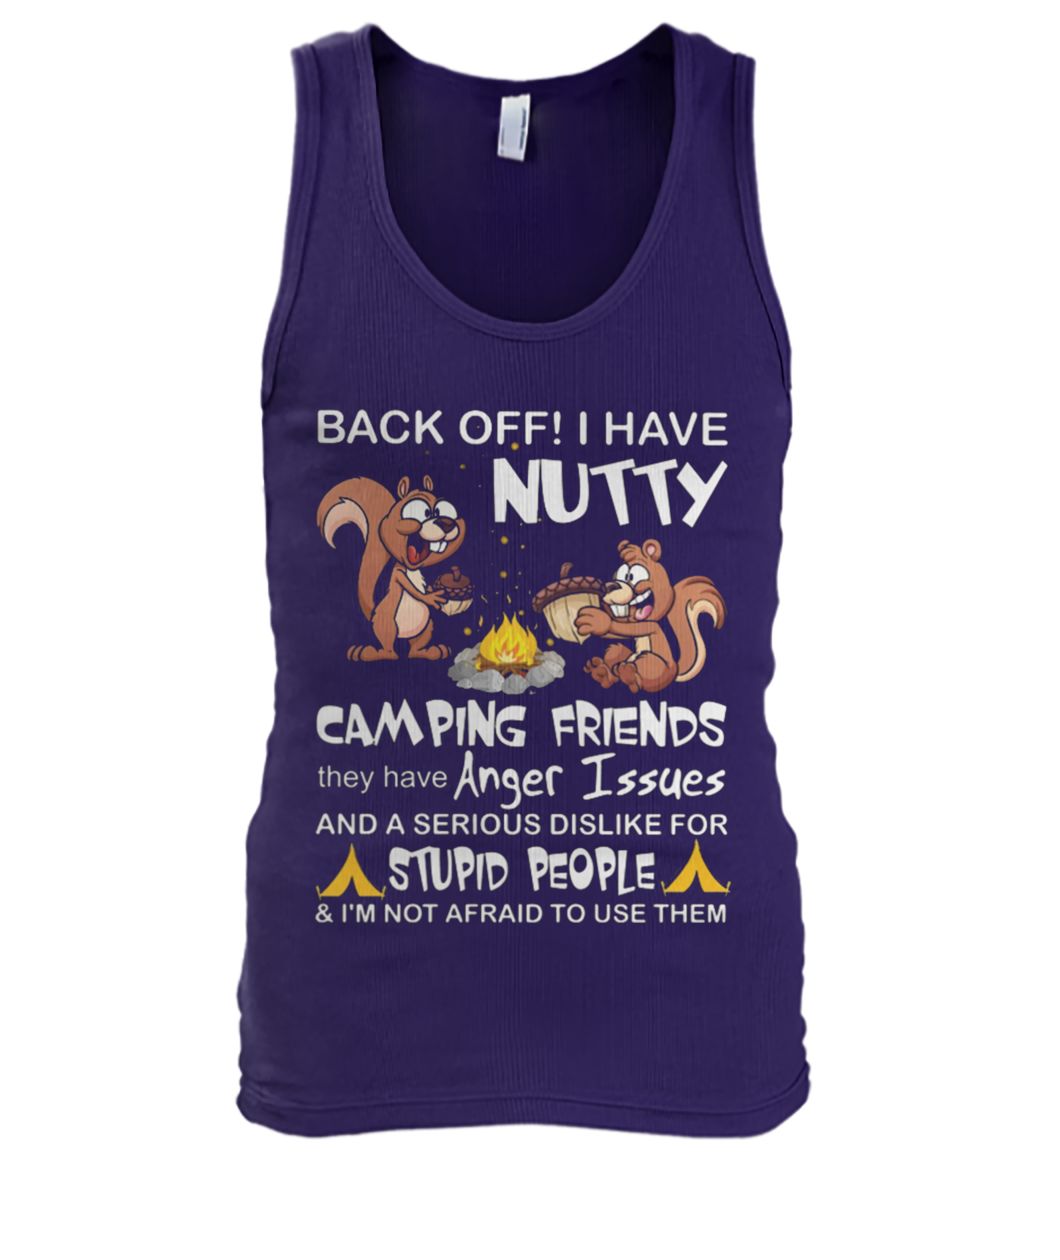 Squirrels back off I have nutty camping friends men's tank top